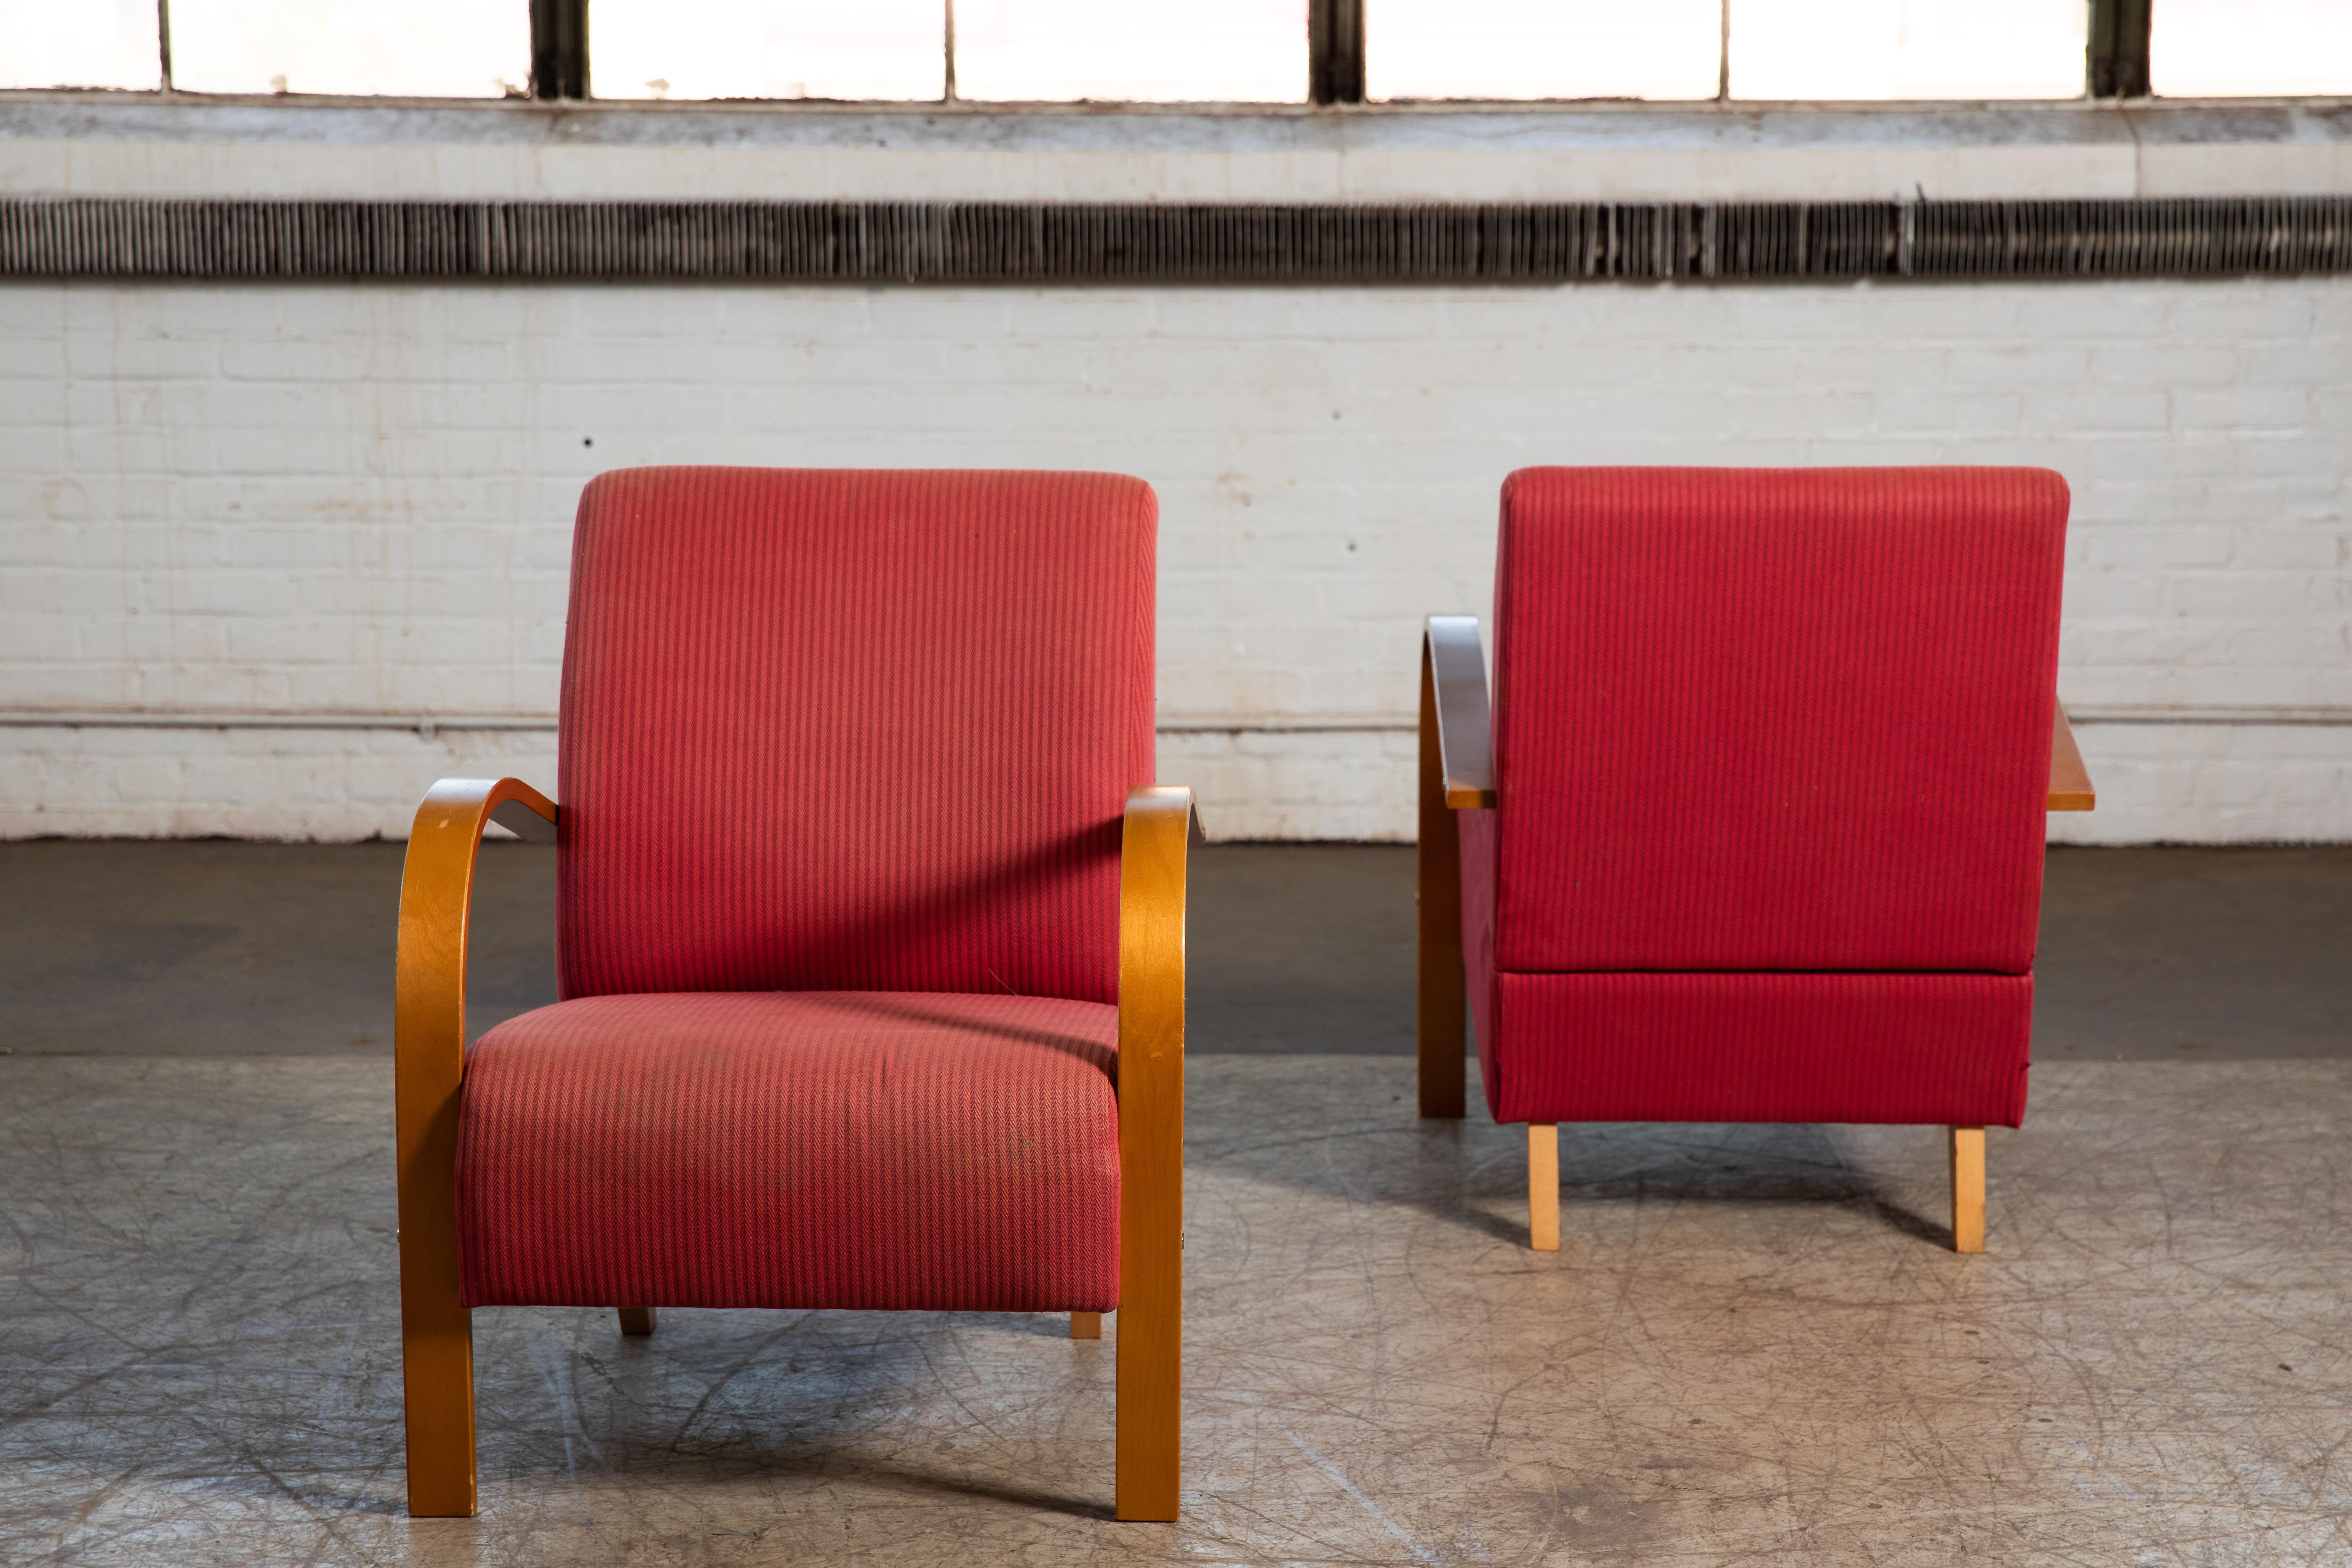 Charming pair of Danish late Art Deco or early midcentury style chairs. We found these chairs in Denamrk and while they look very similar to Fritz Hansen's late art deco style chairs from the 1940's these are of a later date and probably made around